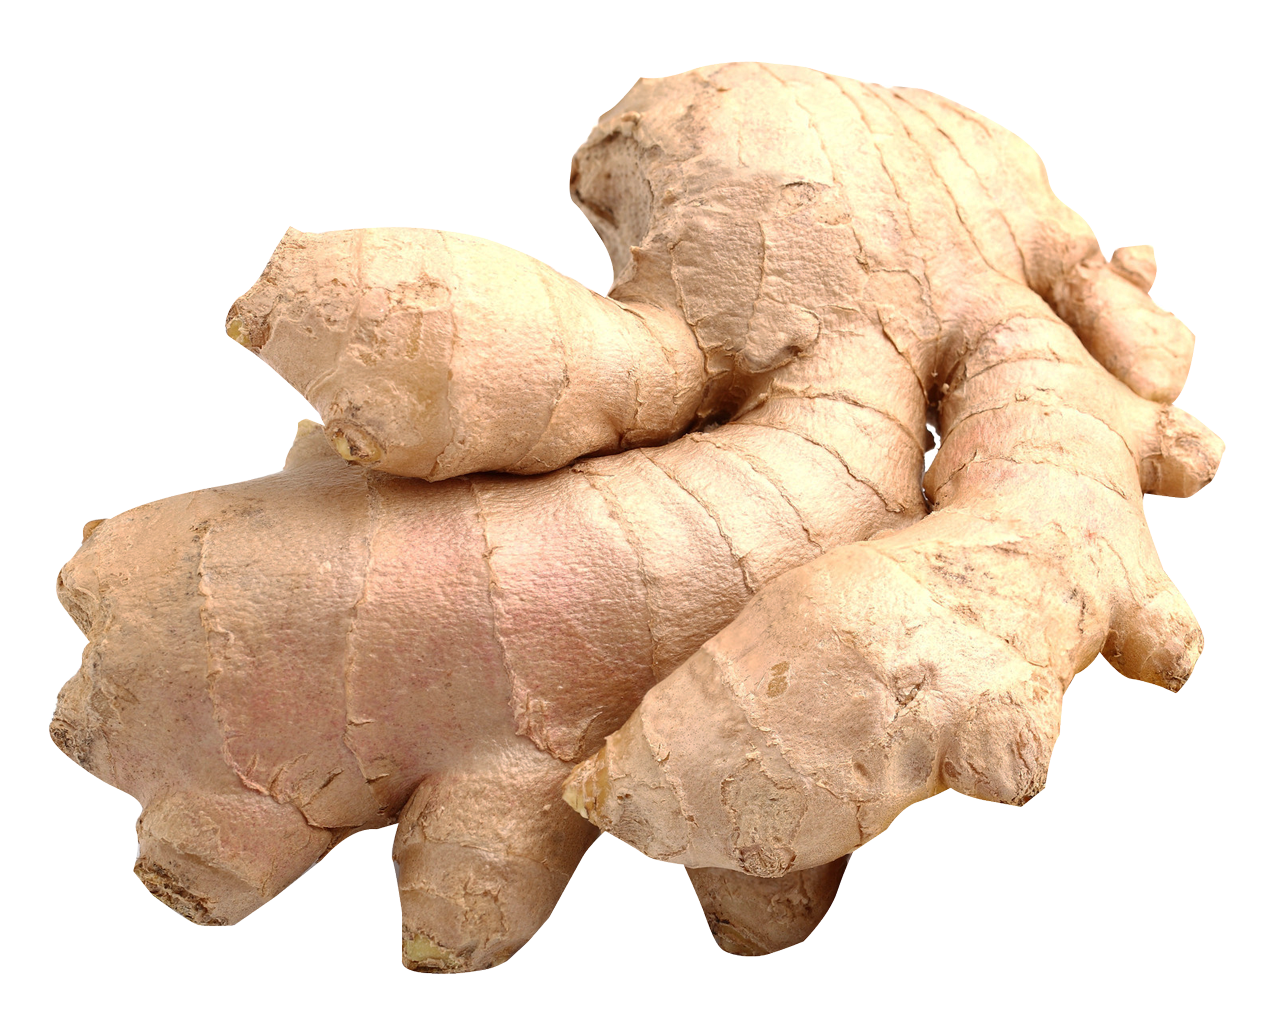 ginger png image collection for download #27469